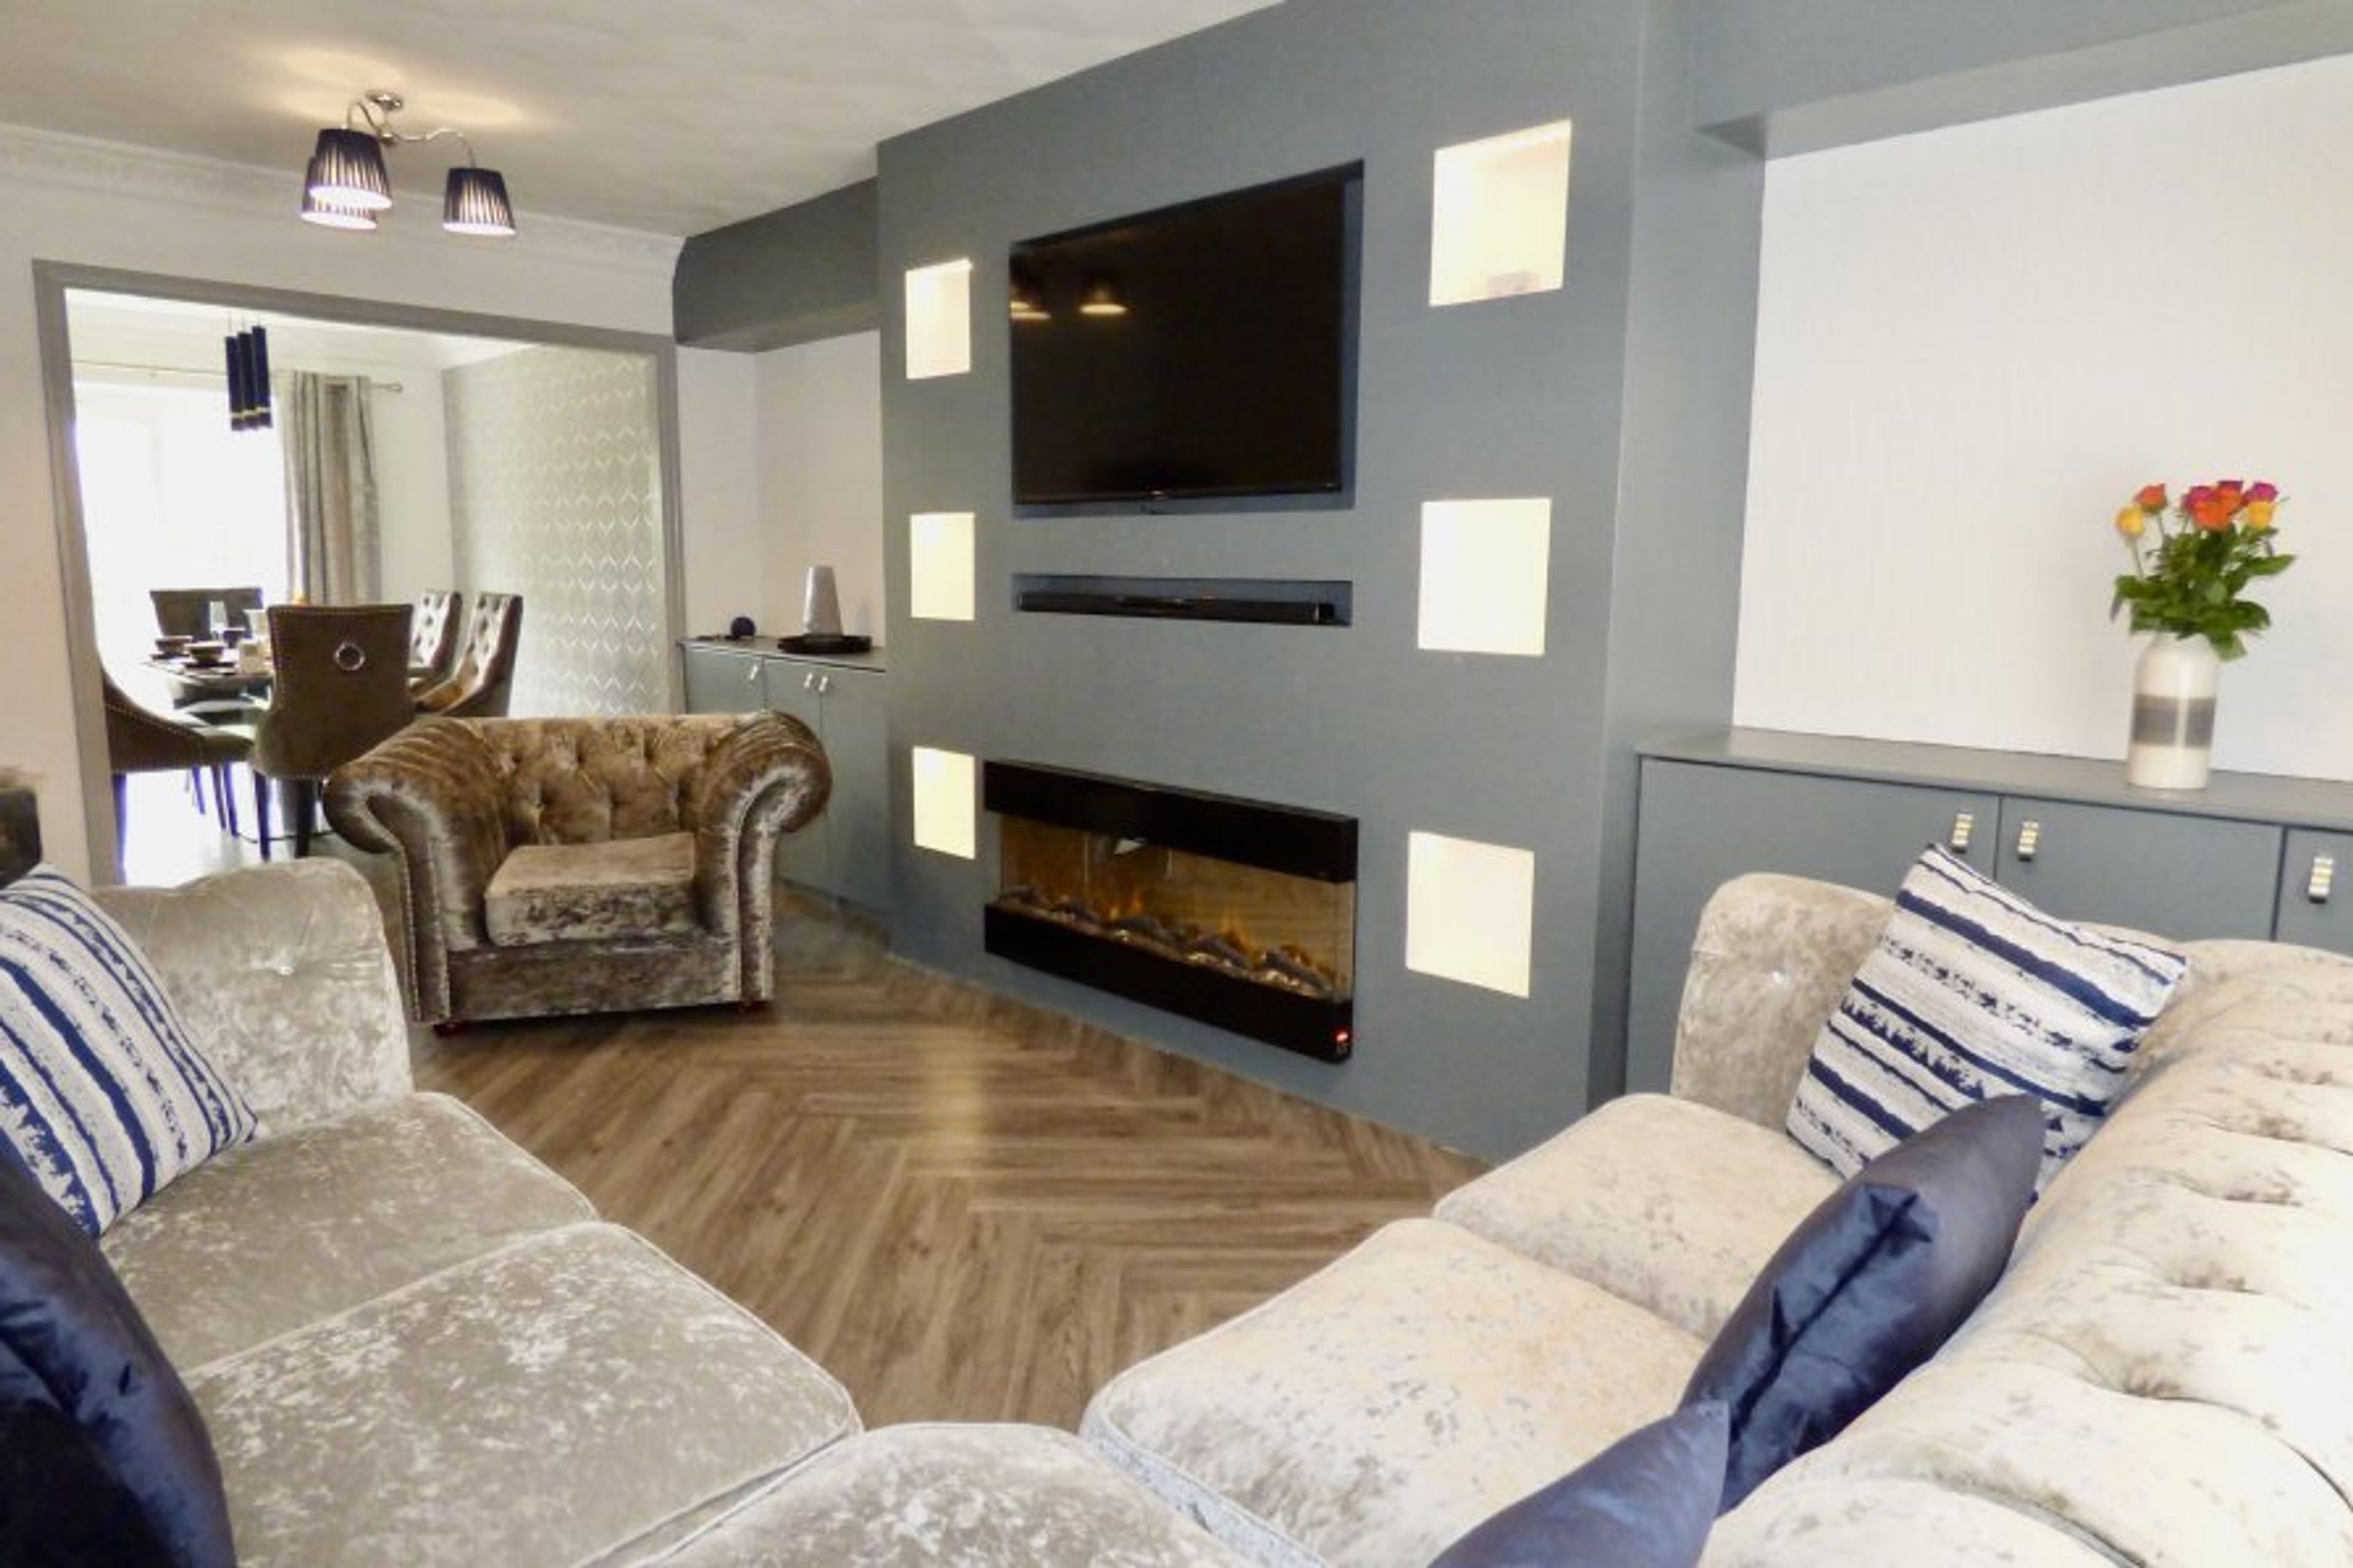 Lounge area - comfortable seating and the use of a 55" smart tv